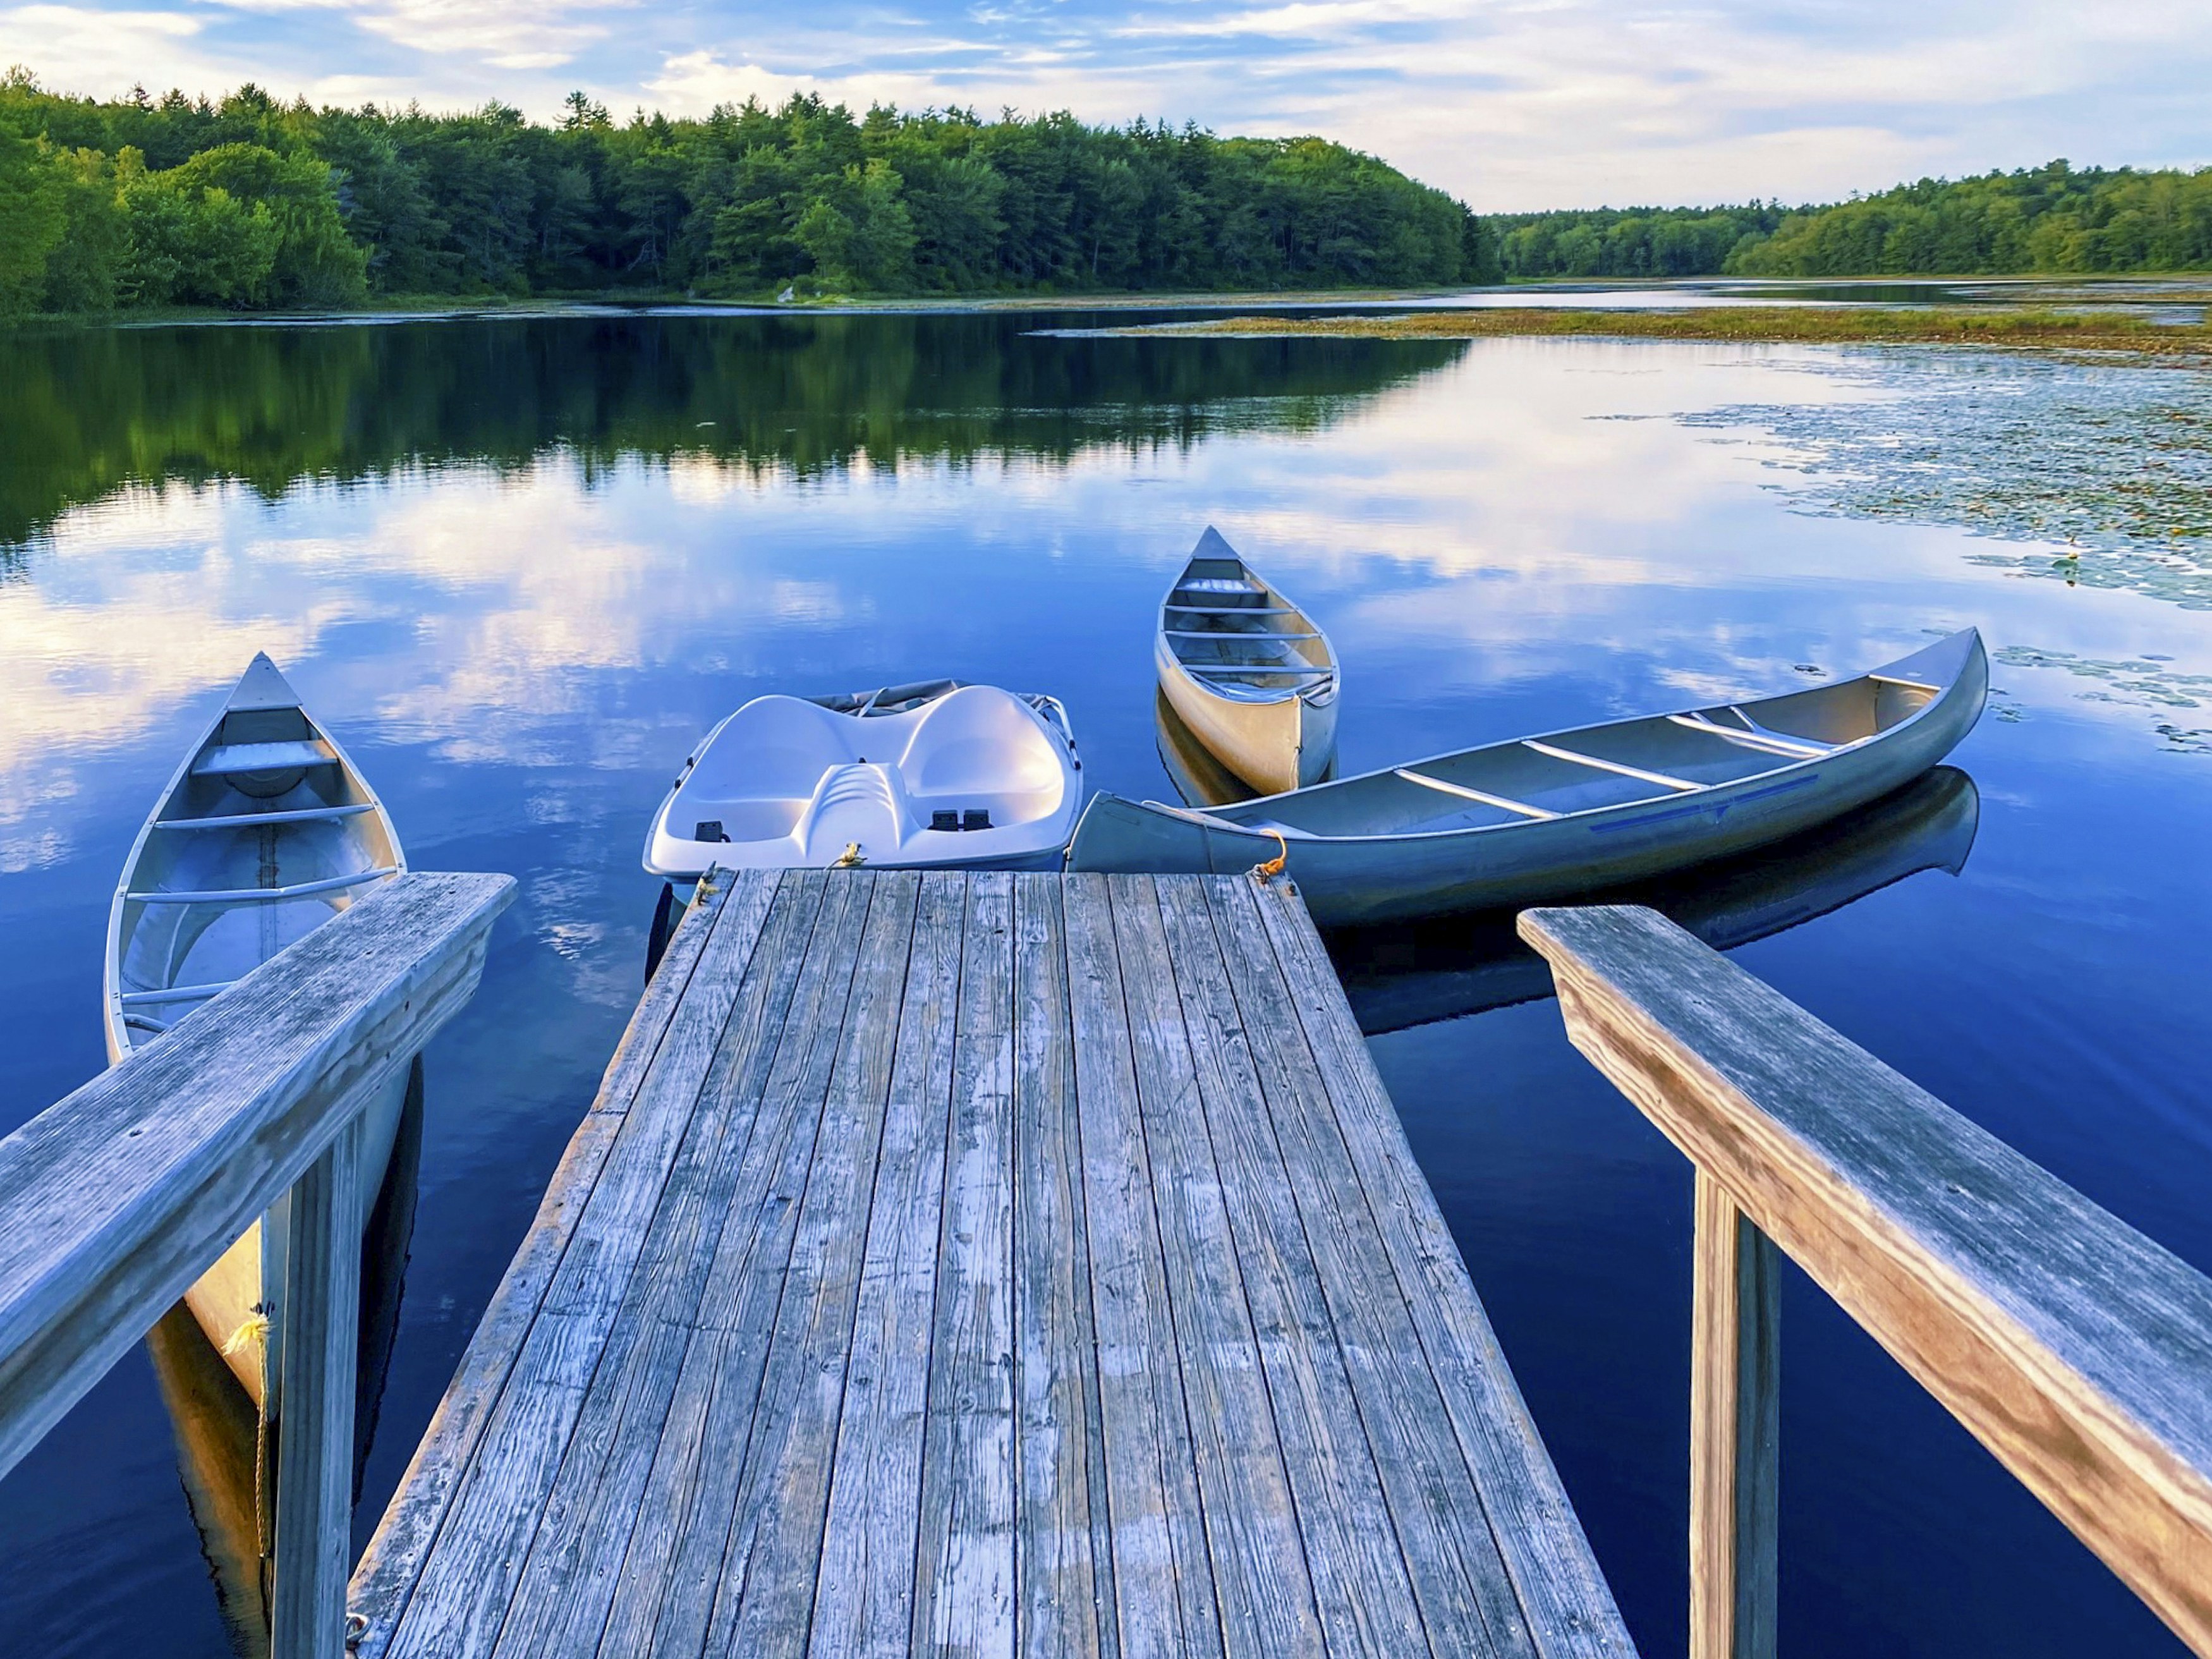 Canoes on a lake dock in Maine.